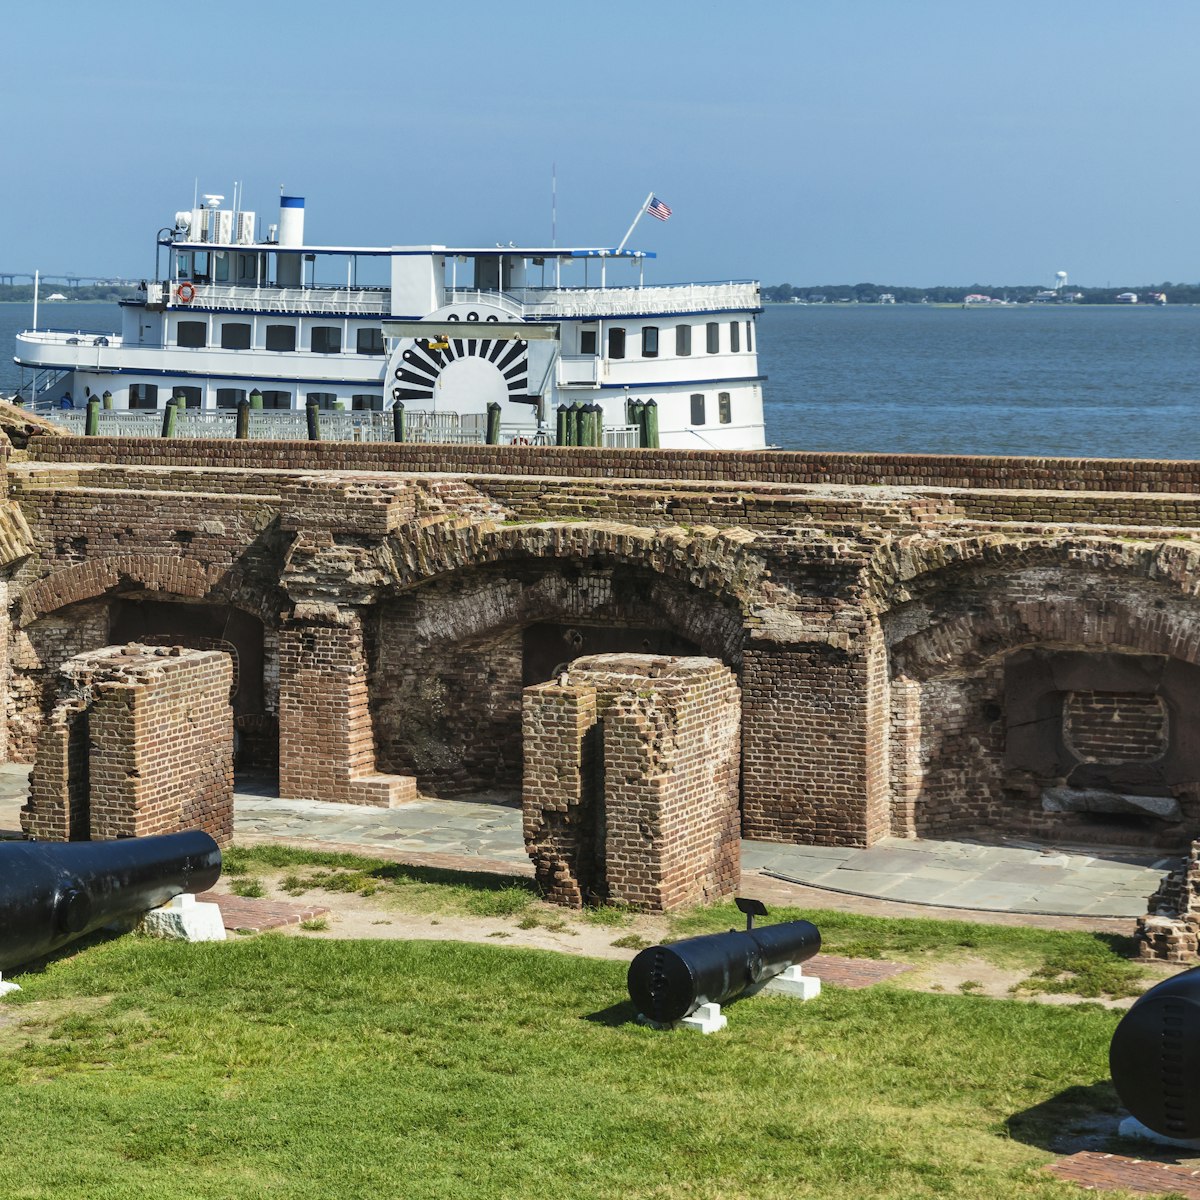 Two 15 inch 50,000-pound Rodman canons (on the sides), the largest guns used in the Civil War, are on display at the Fort Sumter site in Charleston, South Carolina.